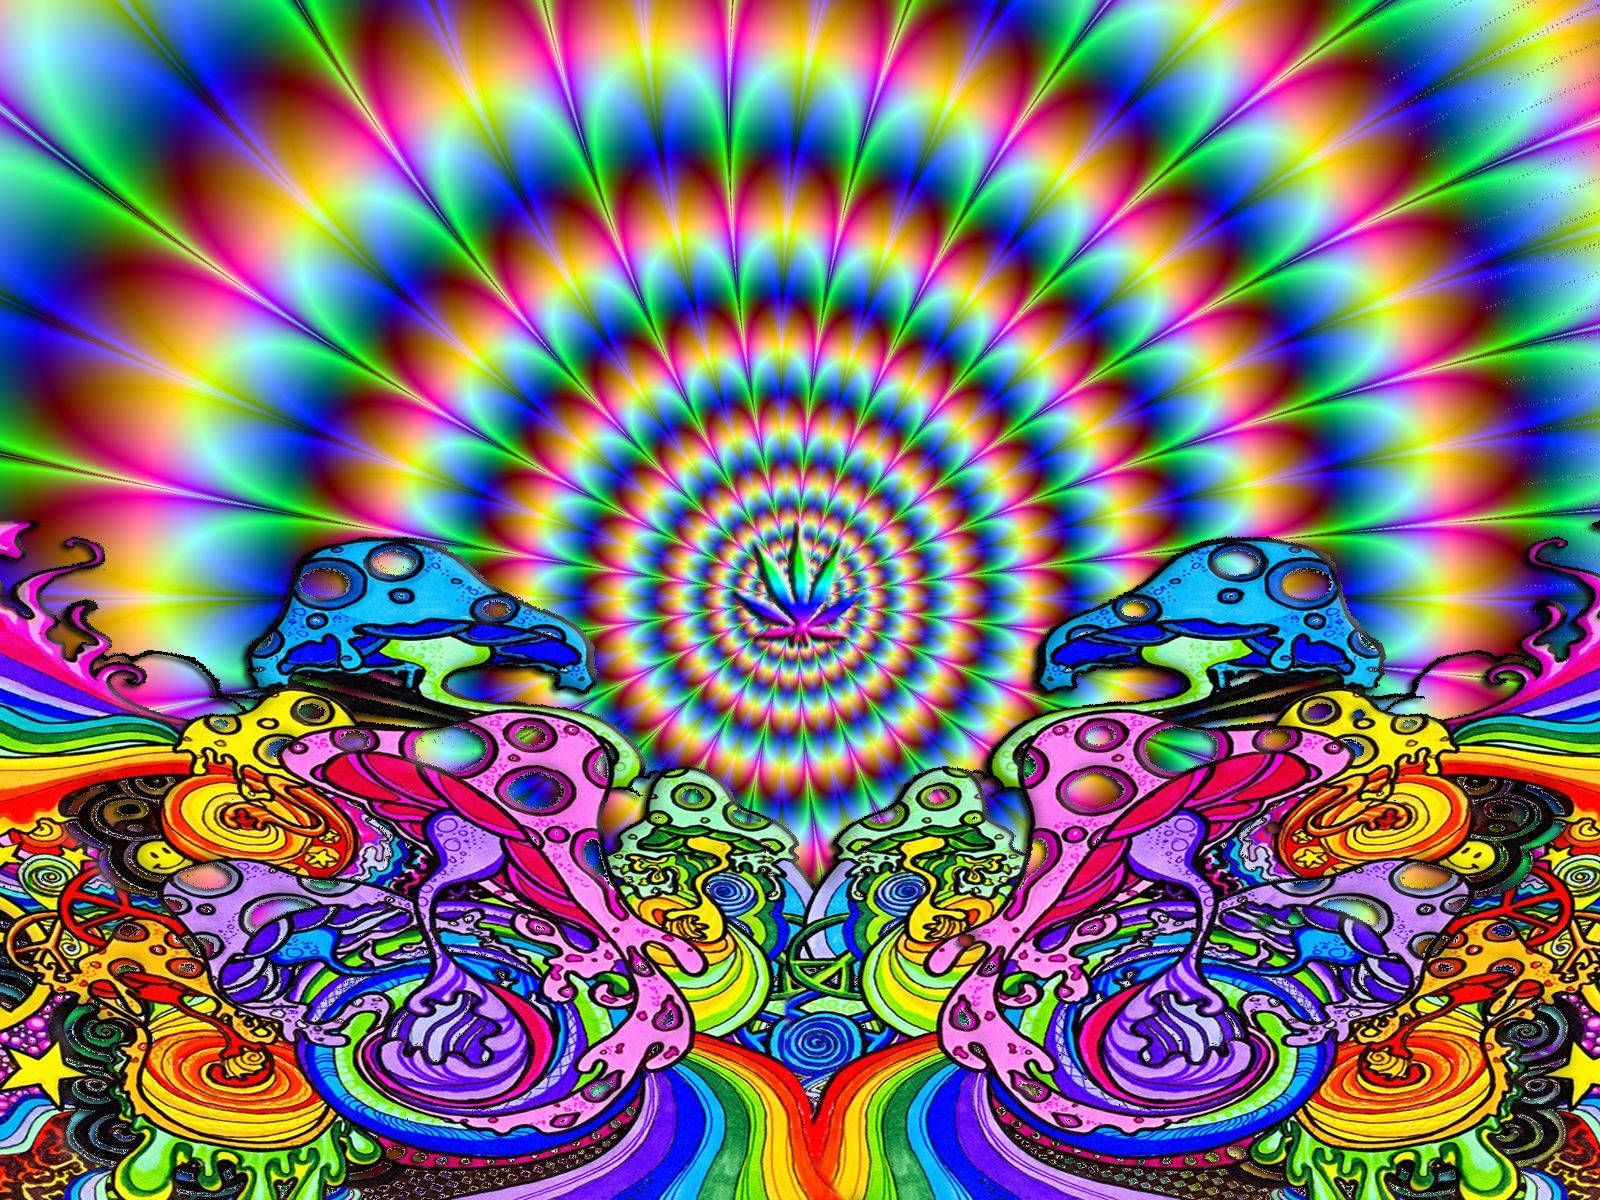 Psychedelic Weed Image Wallpaper